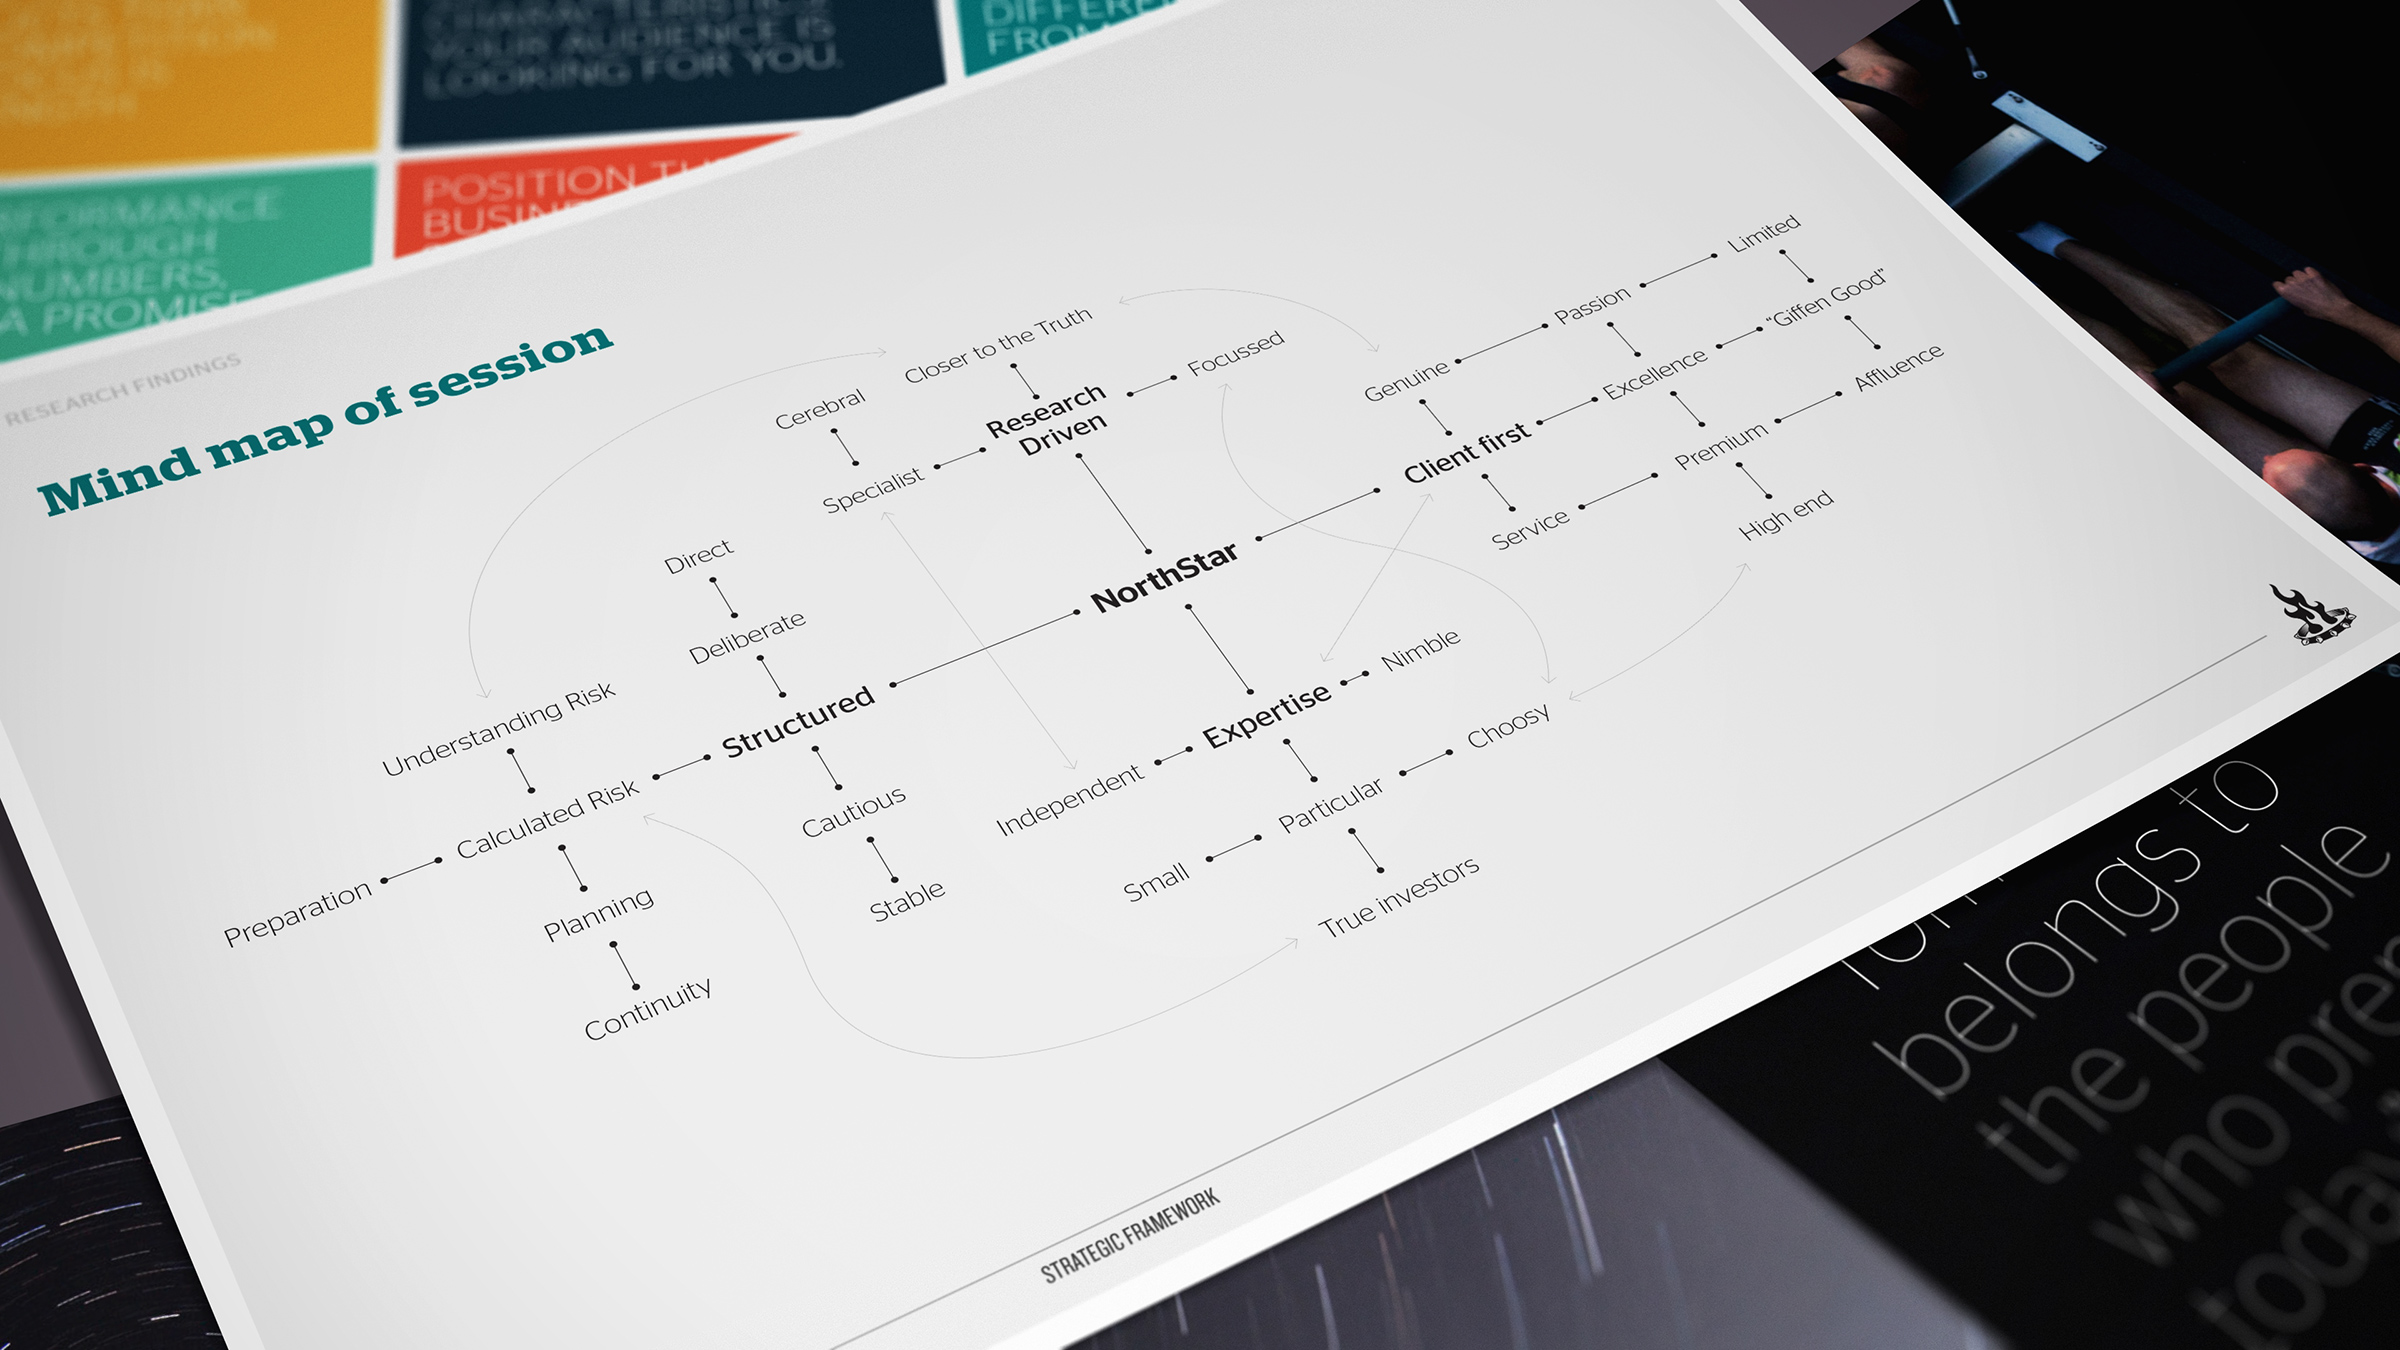 We combined the themes gleaned from research into a positioning mind map.